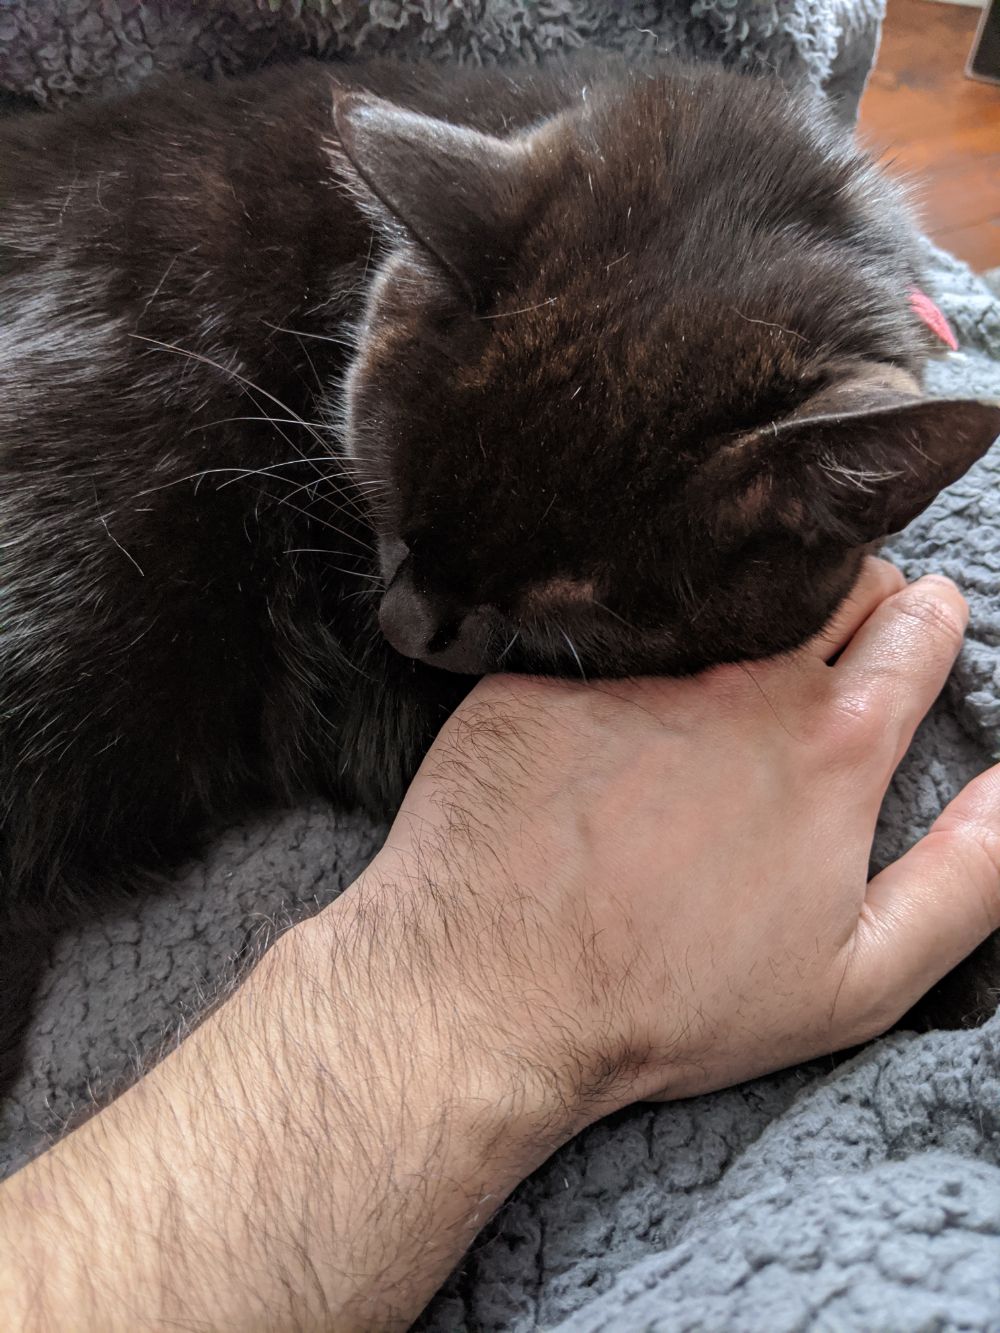 Black cat lying on Jamie's hand as if it's a pillow